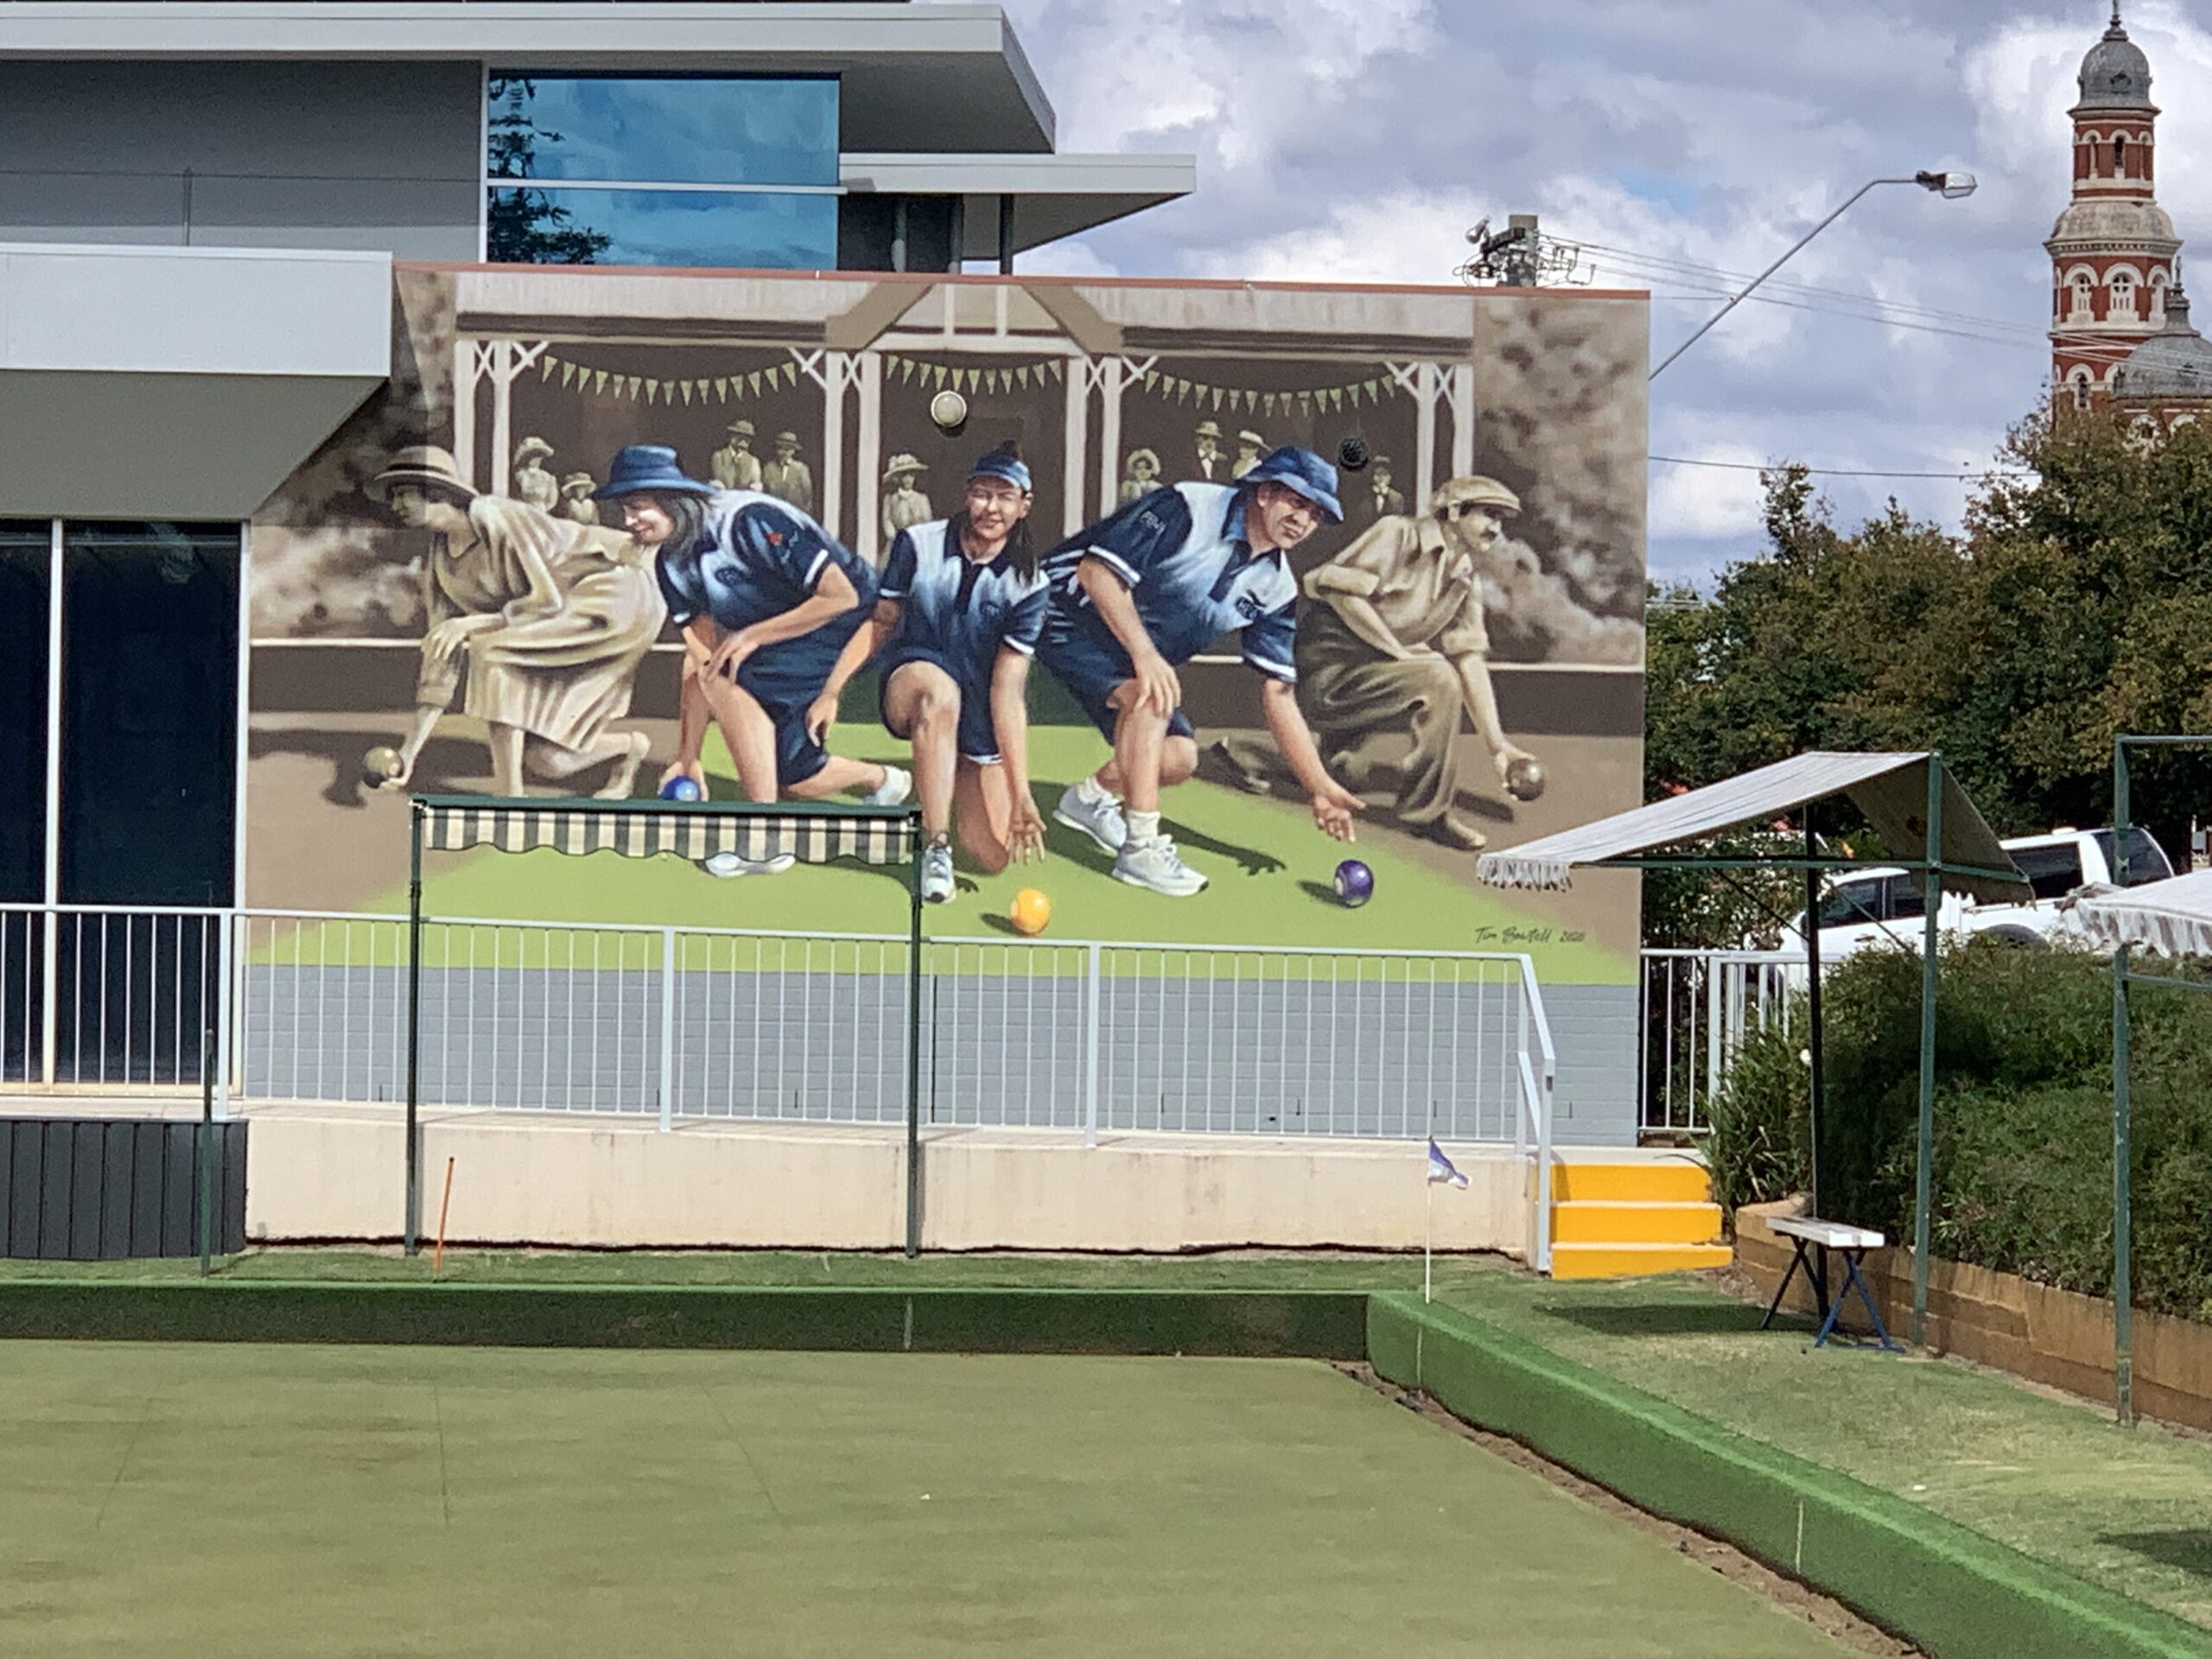 Mural on the wall of the Benalla Bowls Club